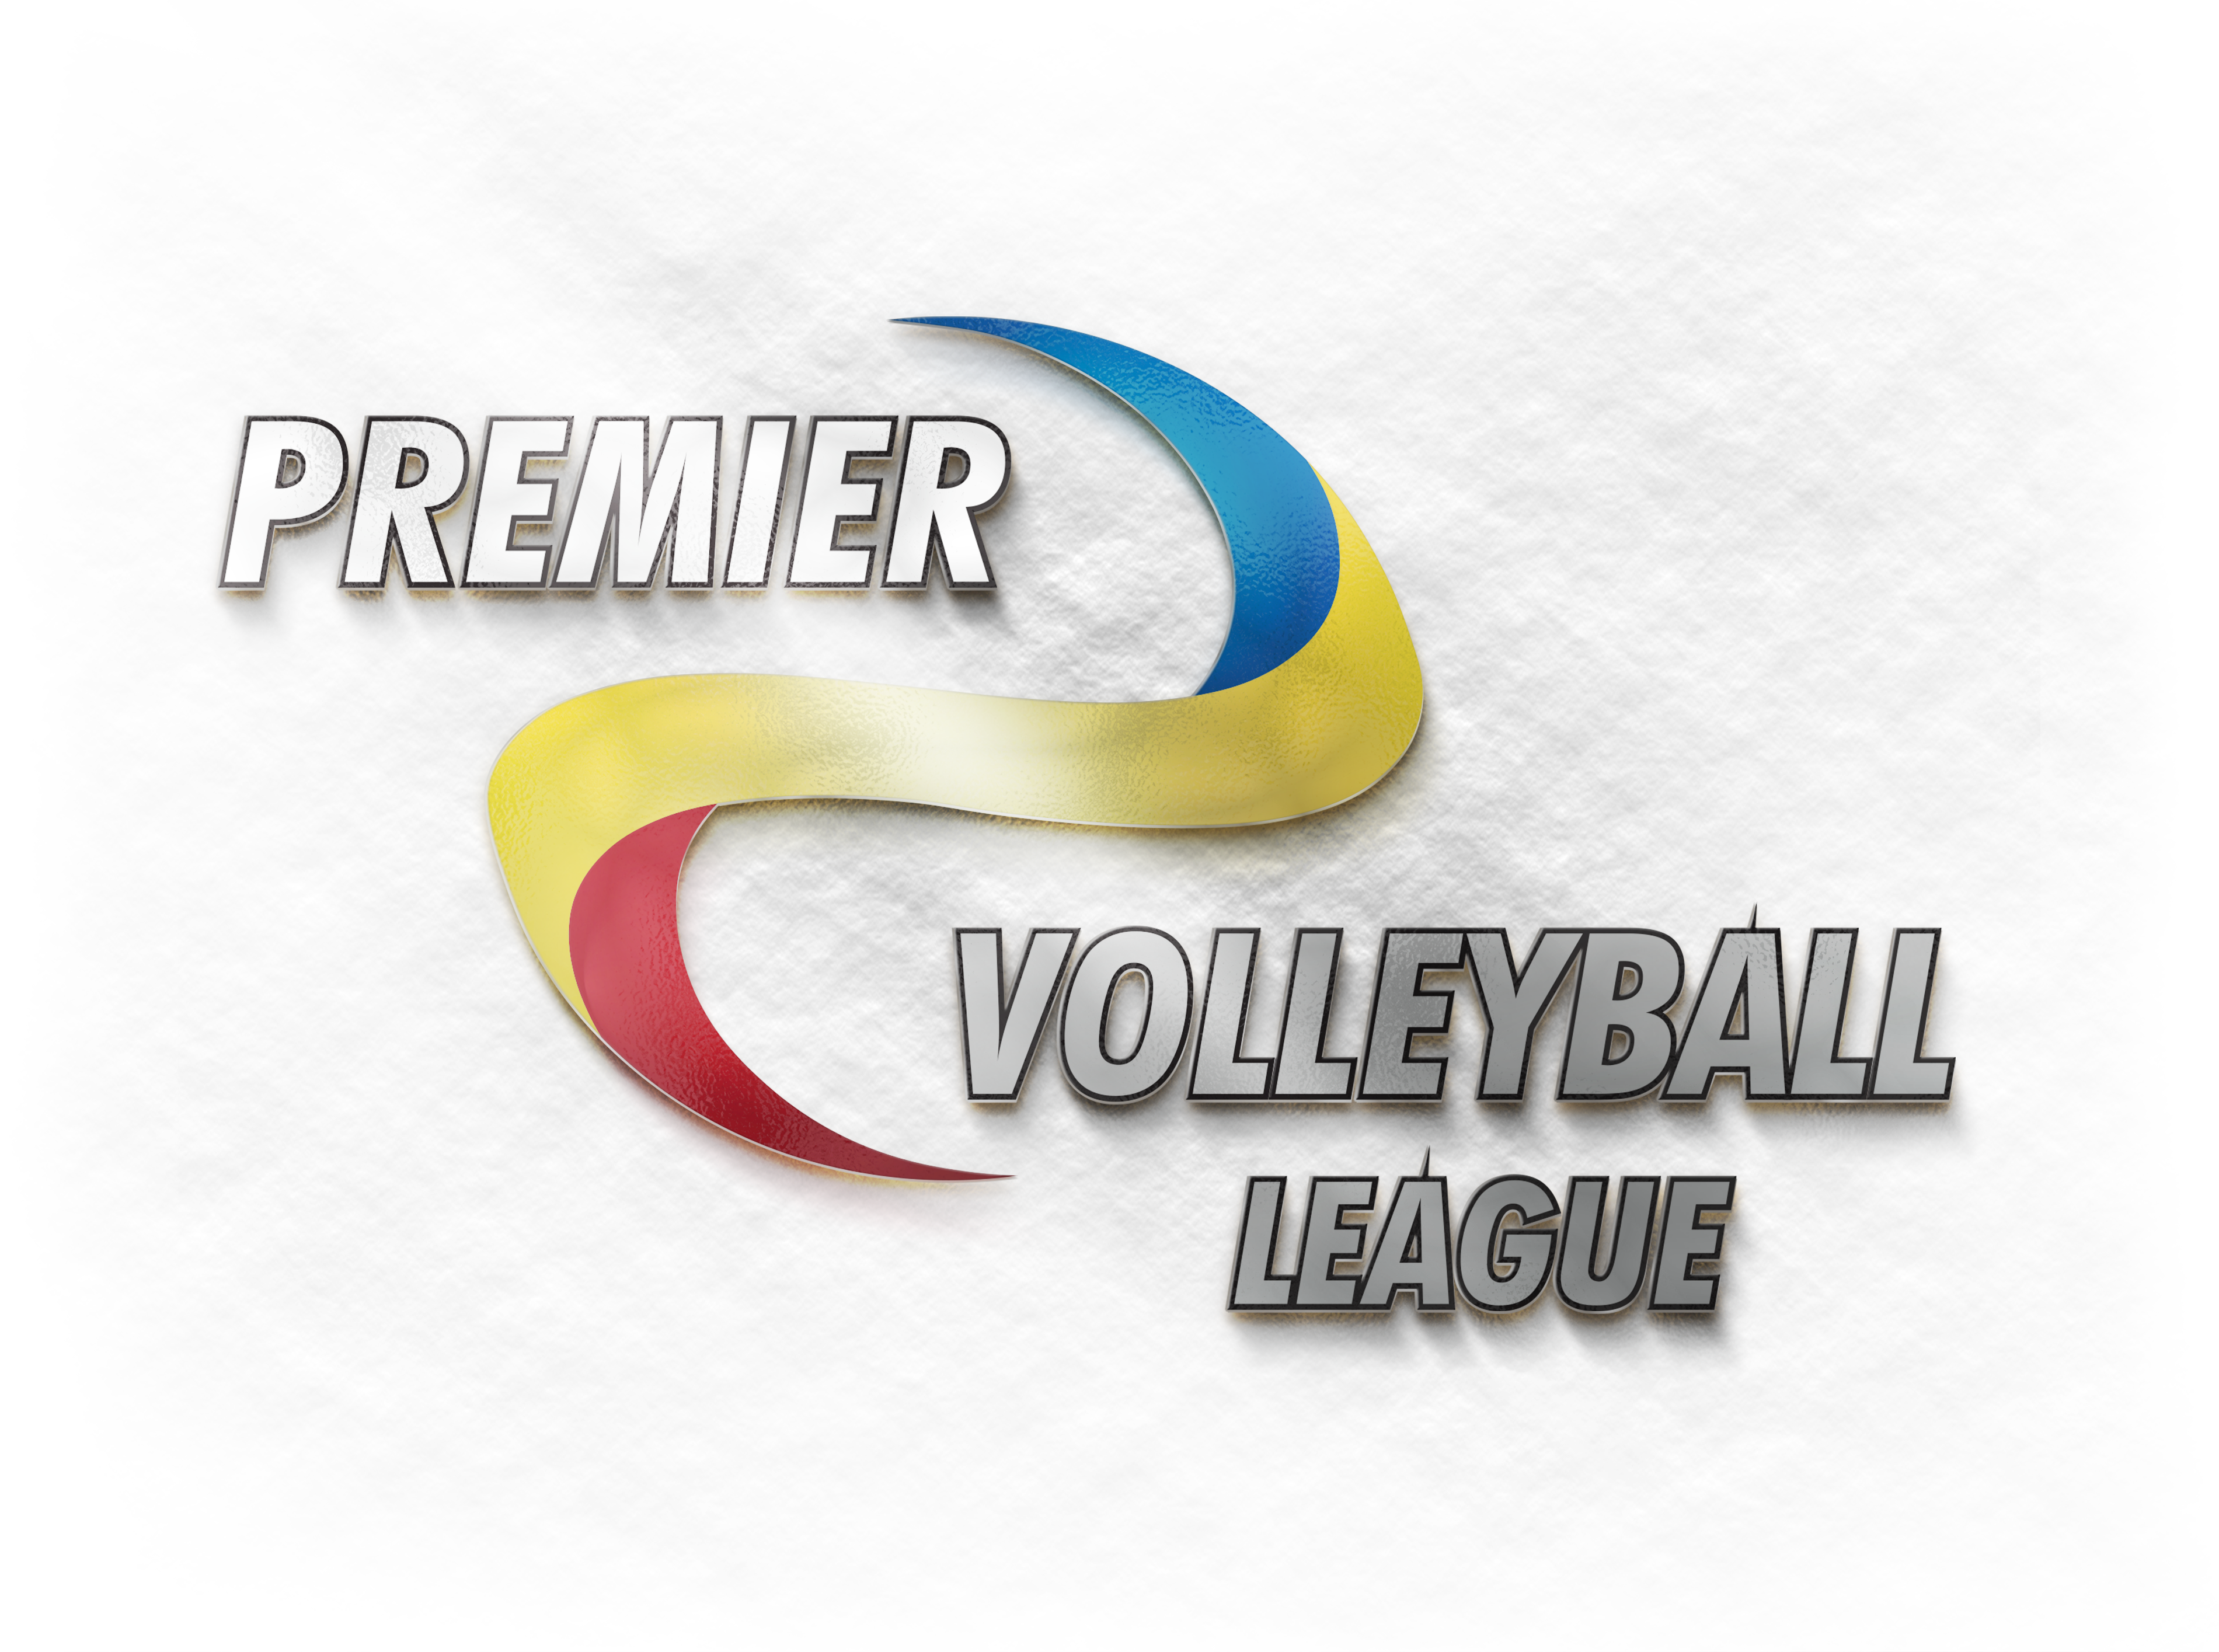 Premier Volleyball league